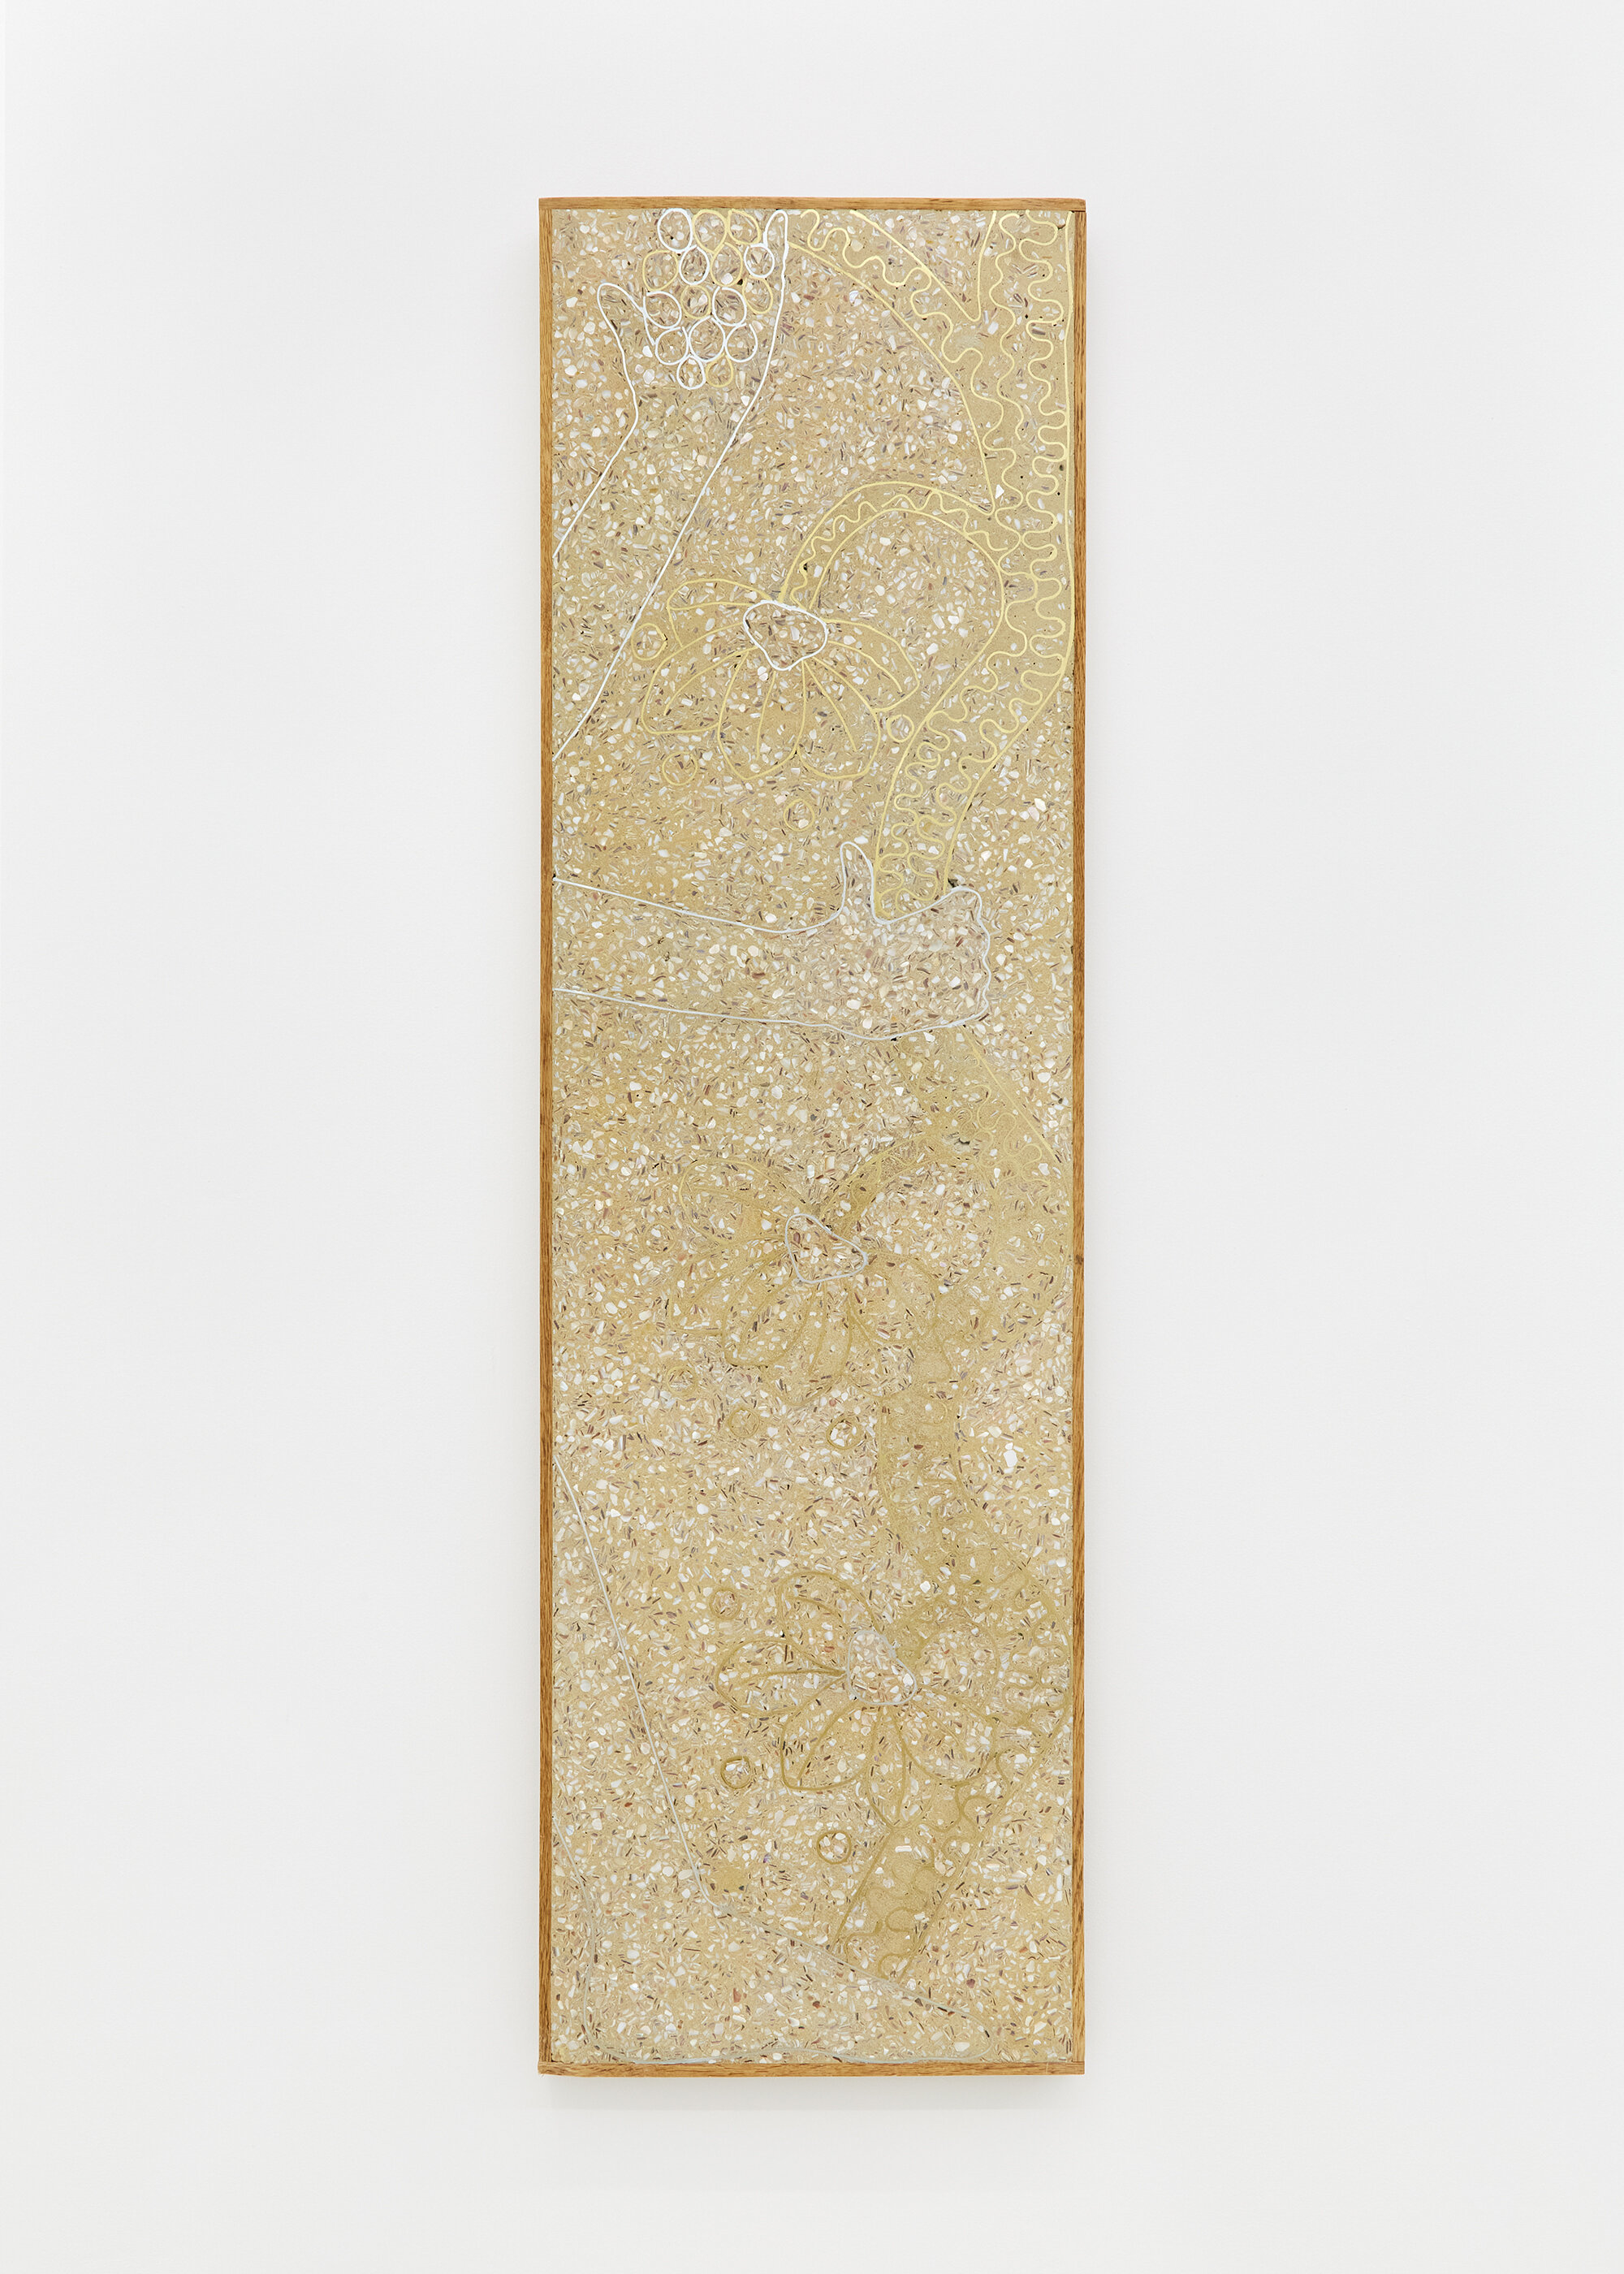  Ficus Interfaith,  Winged Genie with Sacred Tree , 2020. Cementitious terrazzo in oak frame, 123.2 x 35.6 x 3.2 cm  